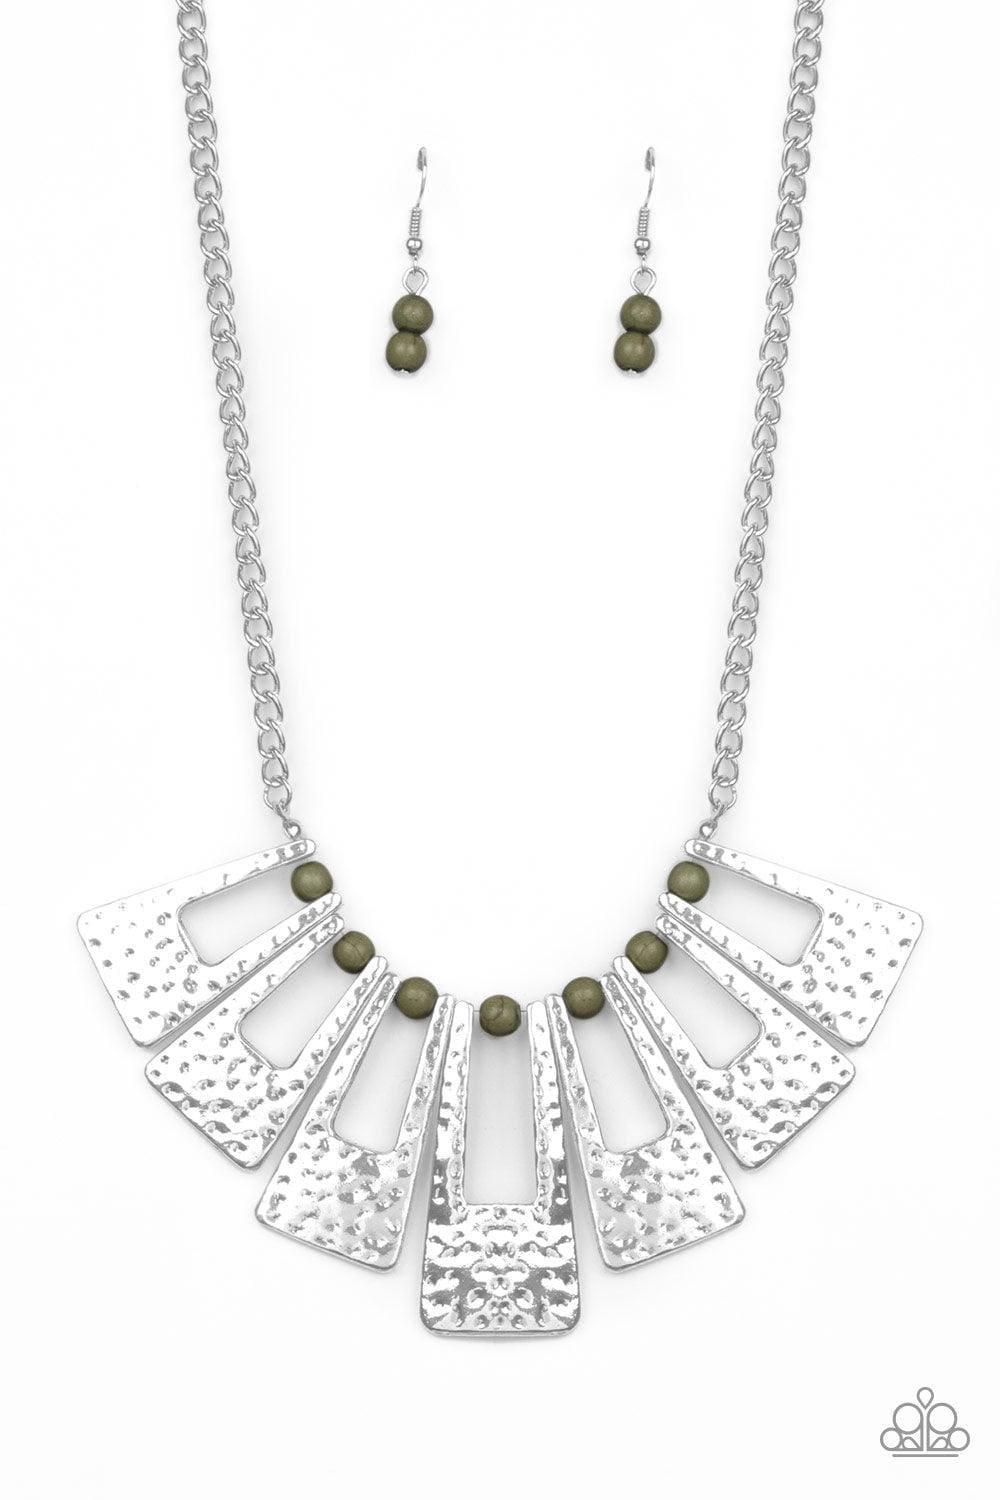 Paparazzi Accessories - Terra Takeover - Green Necklace - Bling by JessieK